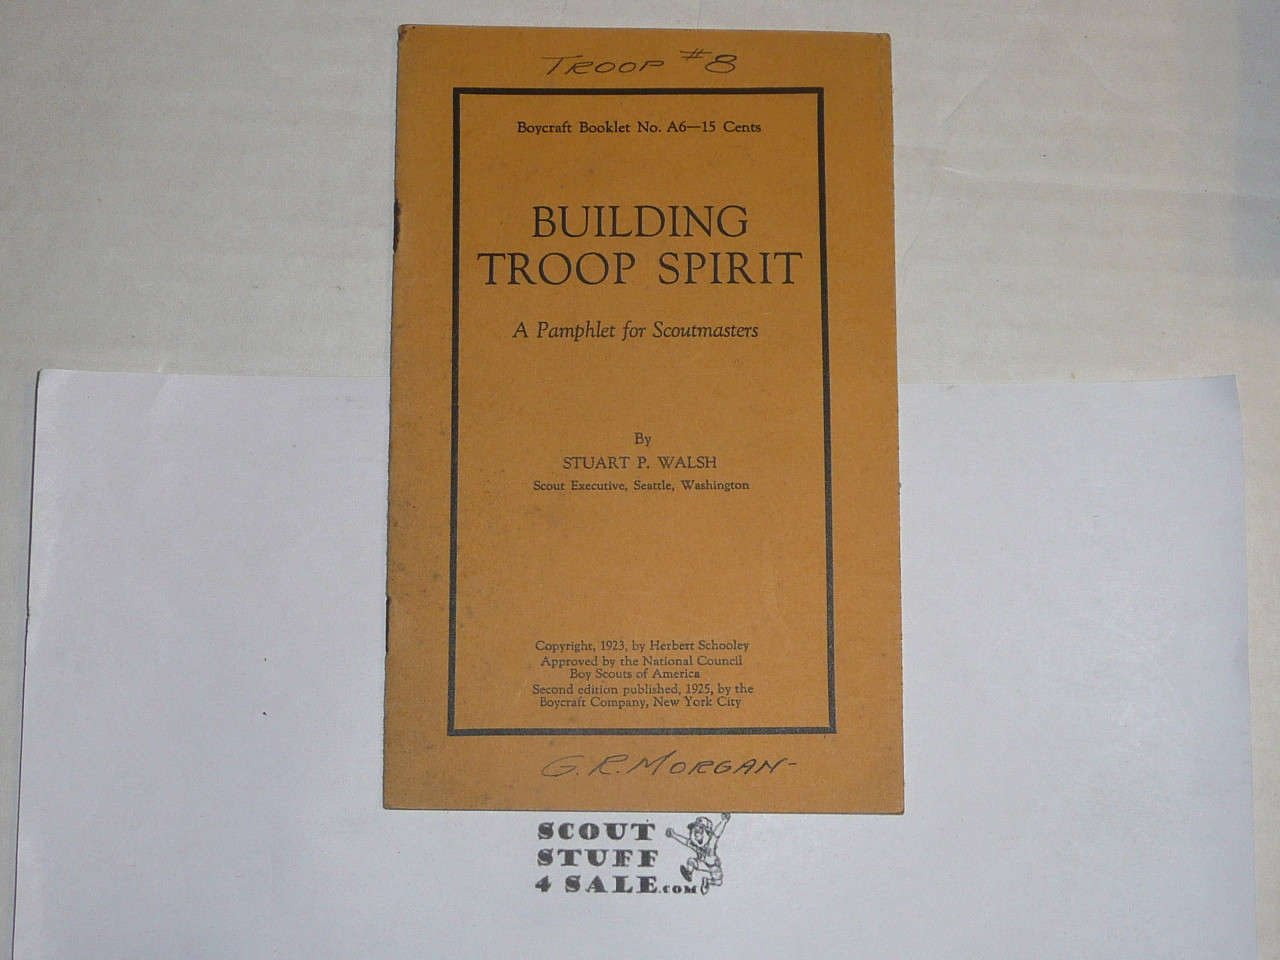 1925 Building Troop Spirit, By The Boycraft Company, Approved by the BSA, Booklet #A6